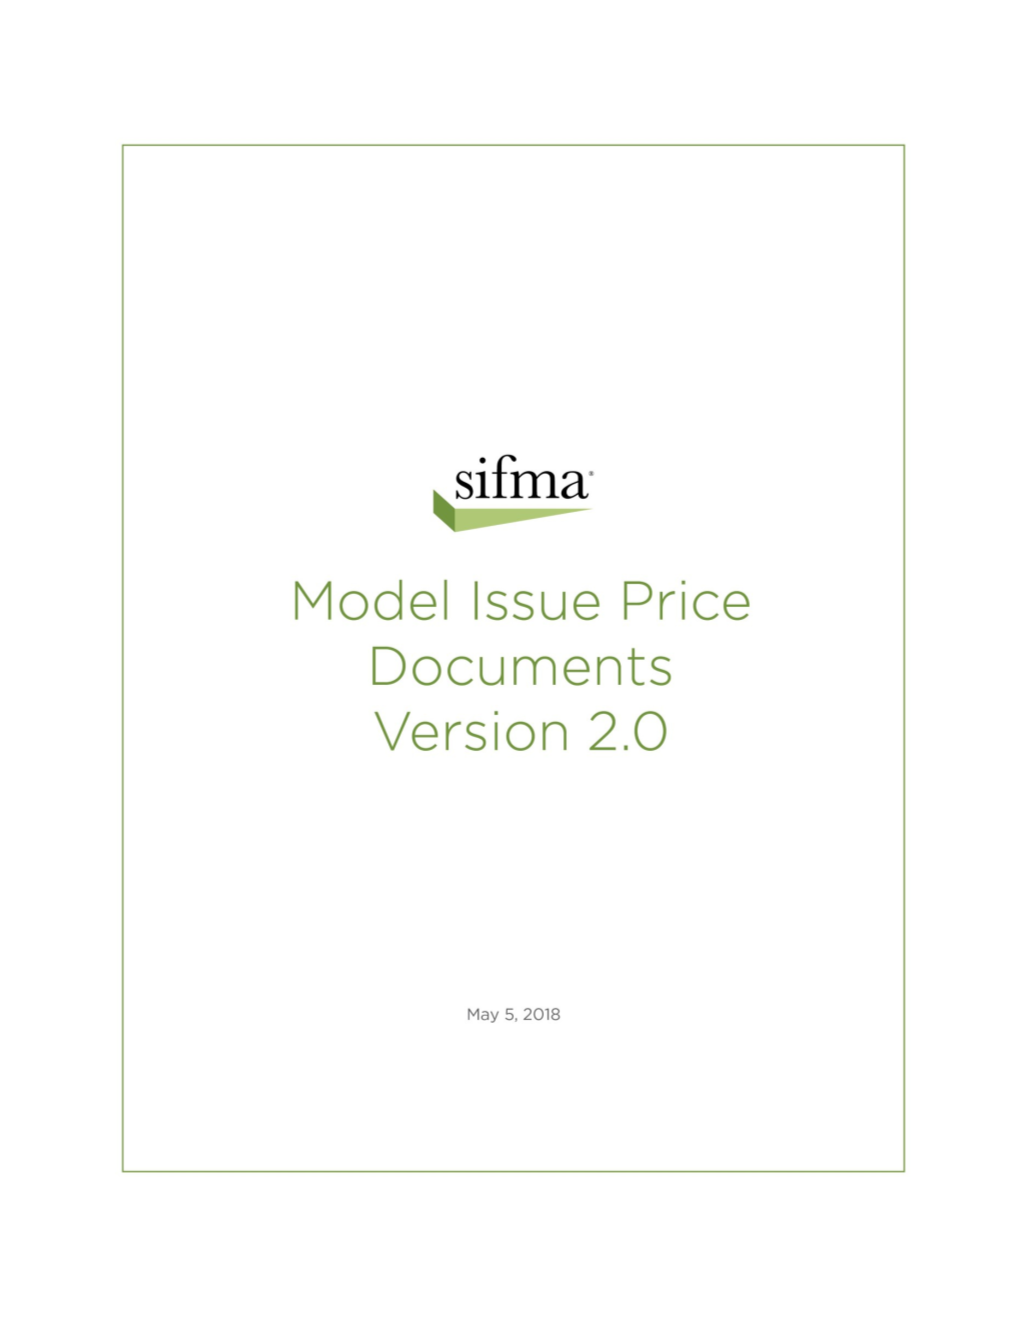 SIFMA Model Issue Price Riders for AAU, Selling Group Agreement, Third-Party Distribution